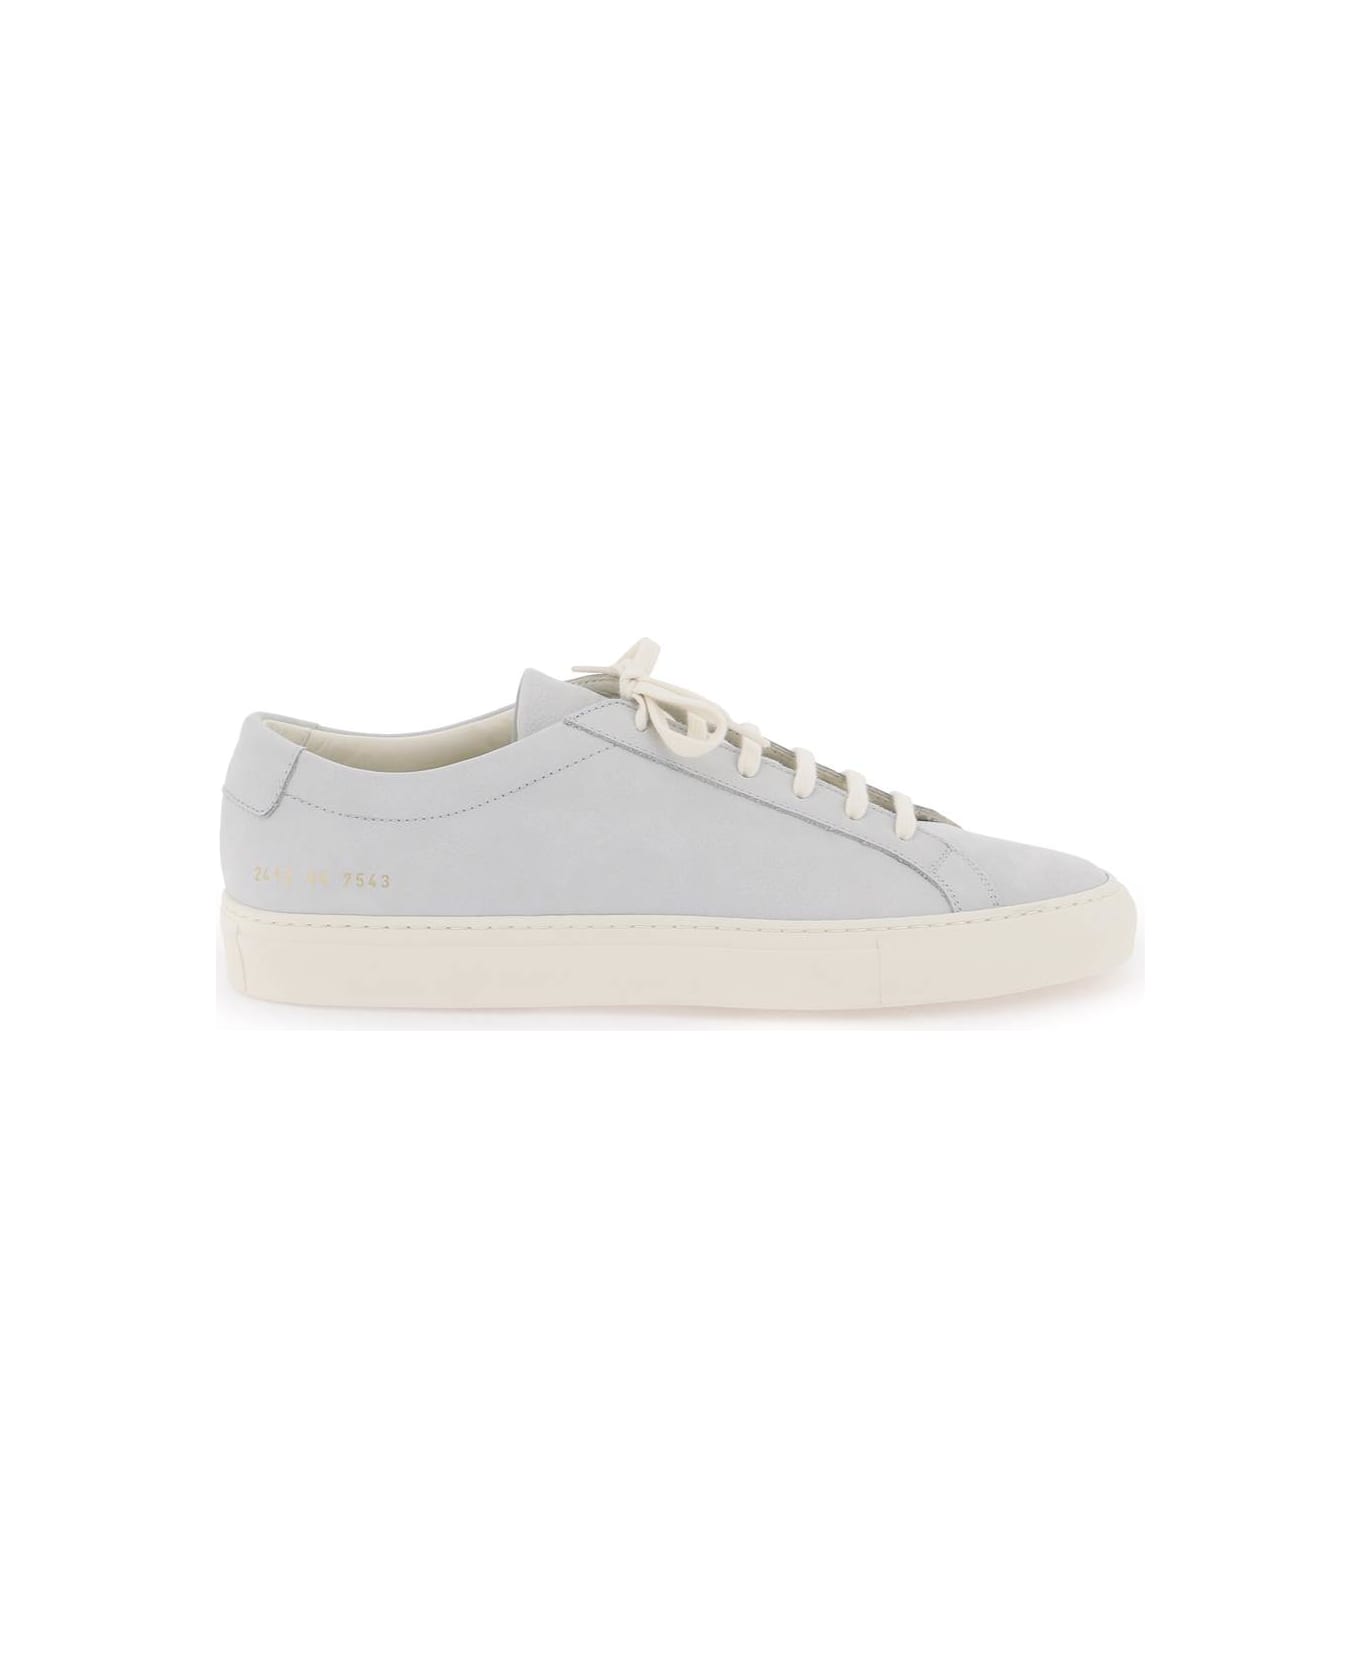 Common Projects Original Achilles Leather Sneakers - GREY スニーカー